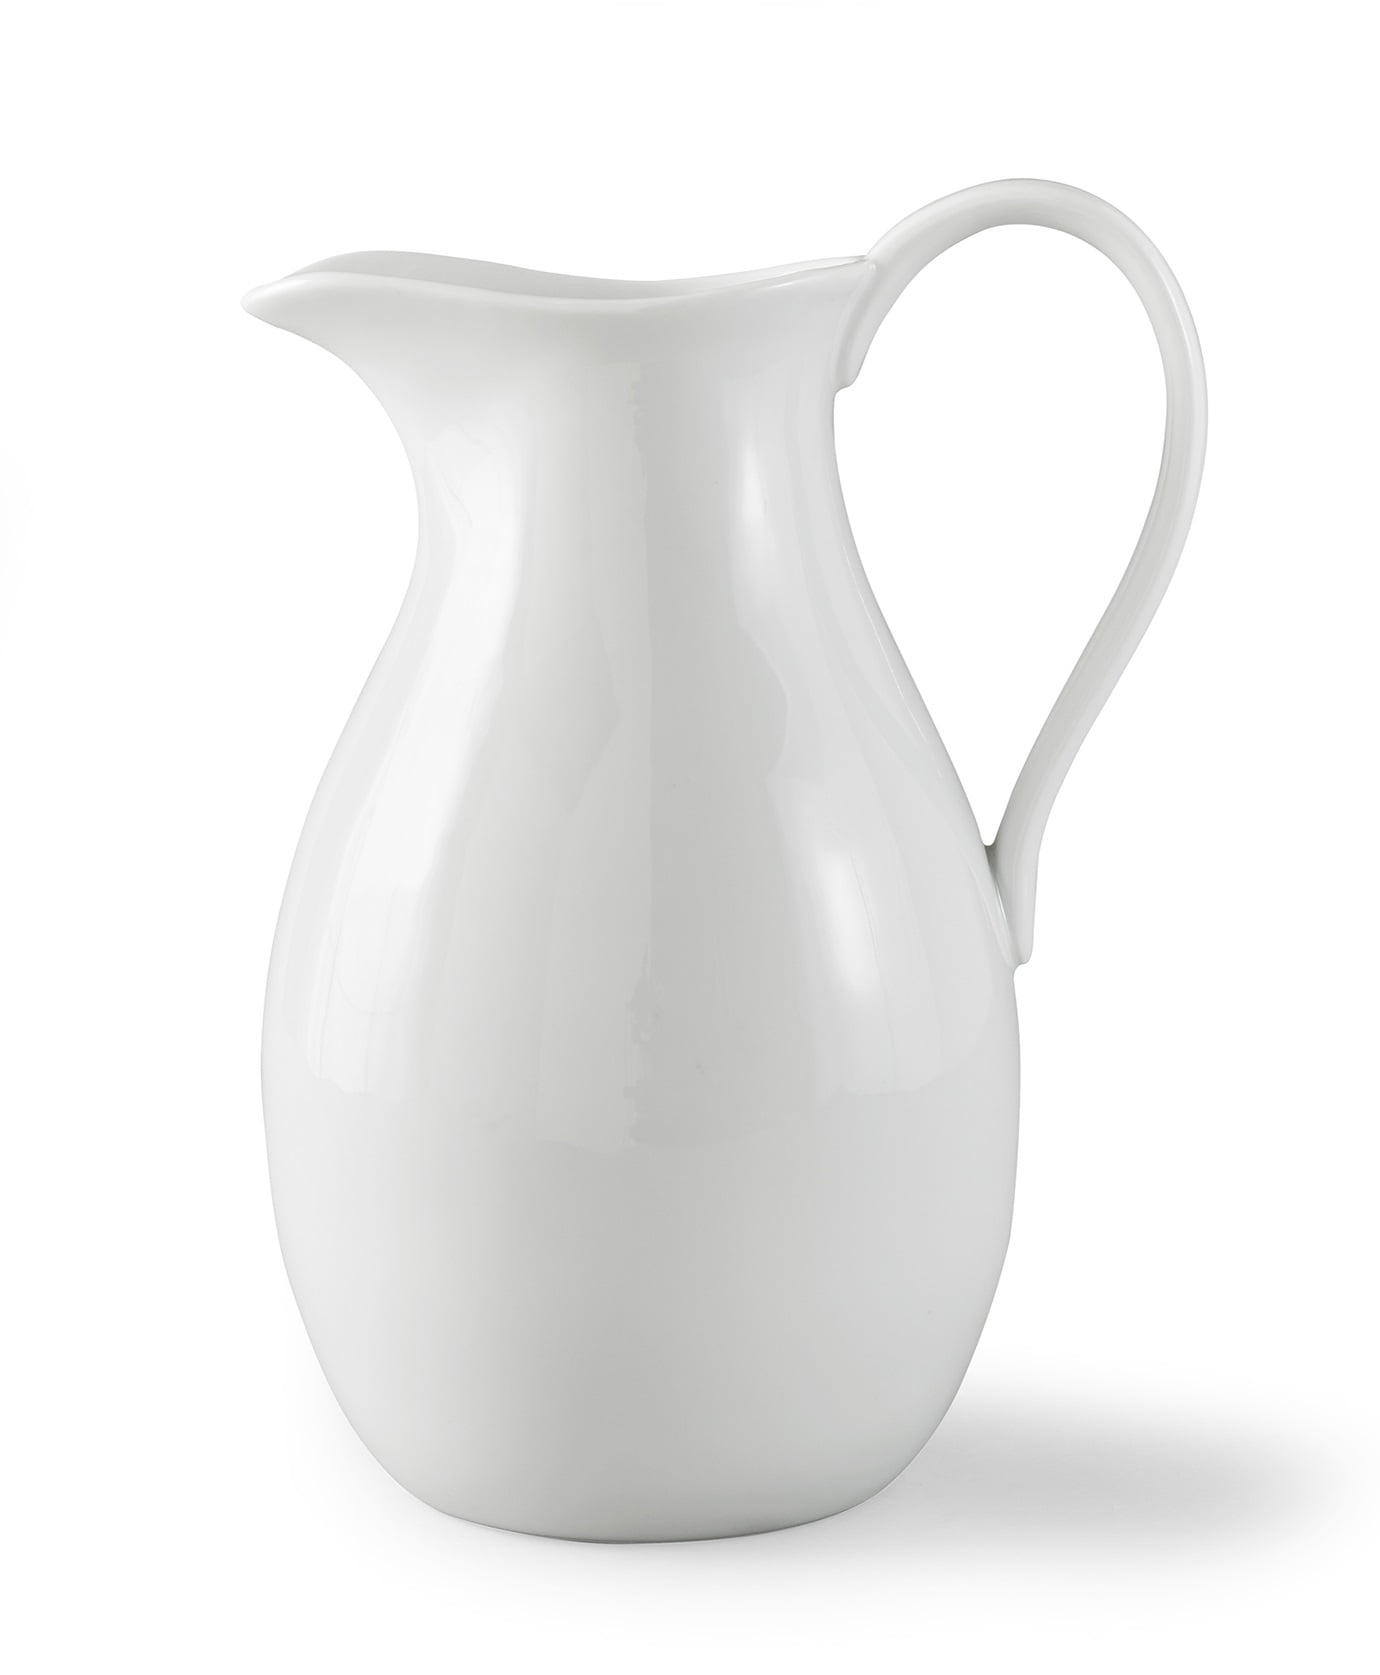 Better Homes & Gardens Exposed White Clay Stoneware Drink Pitcher, 79 Oz 